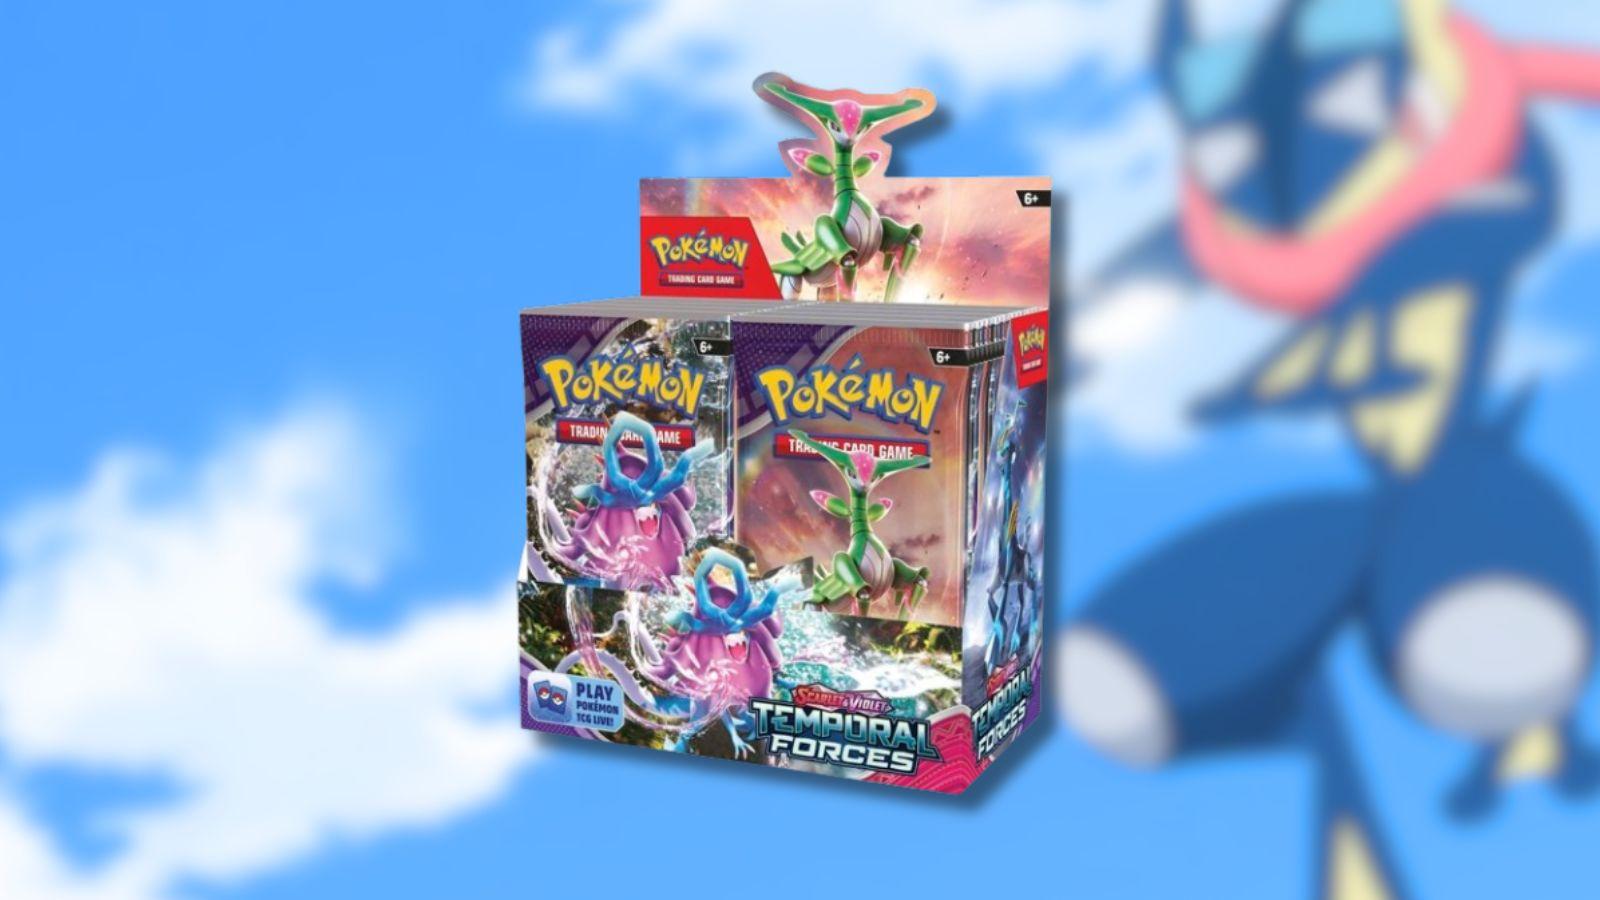 Greninja and Temporal Forces Booster Box Display.